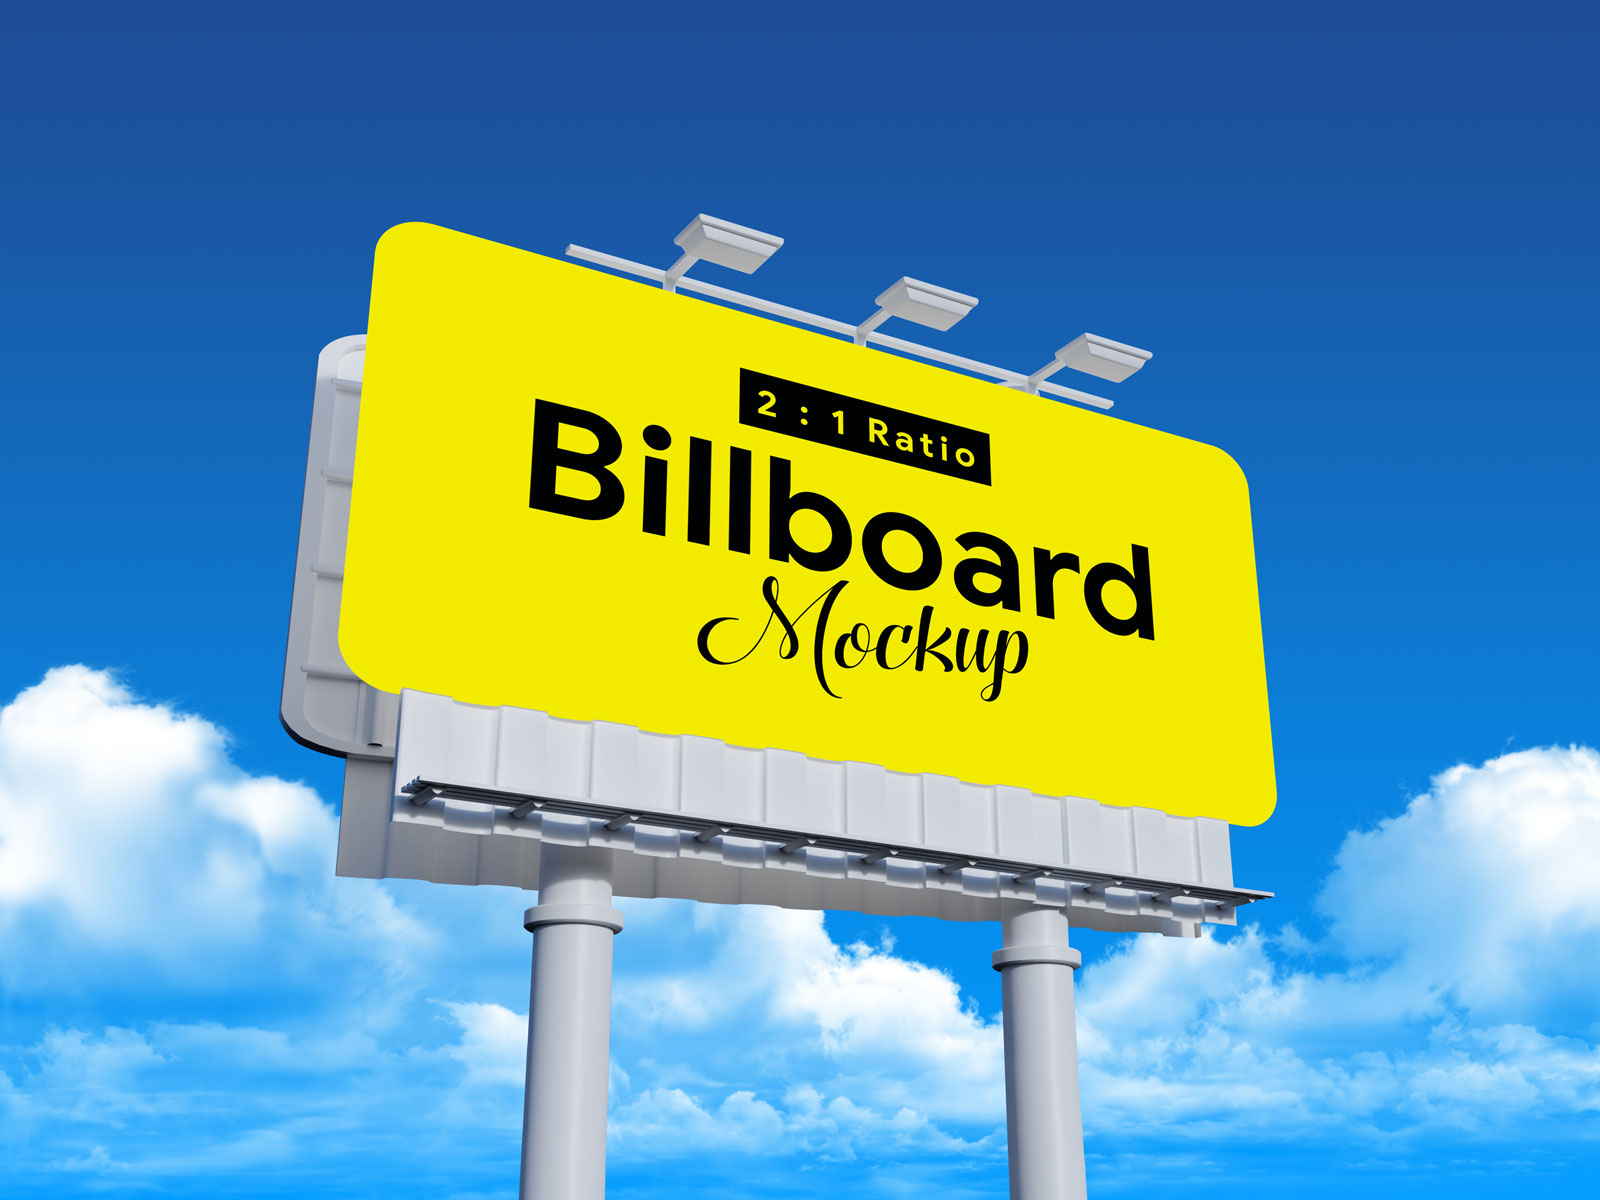 Download Free 2:1 Outdoor Advertising Rounded Corners Billboard ...